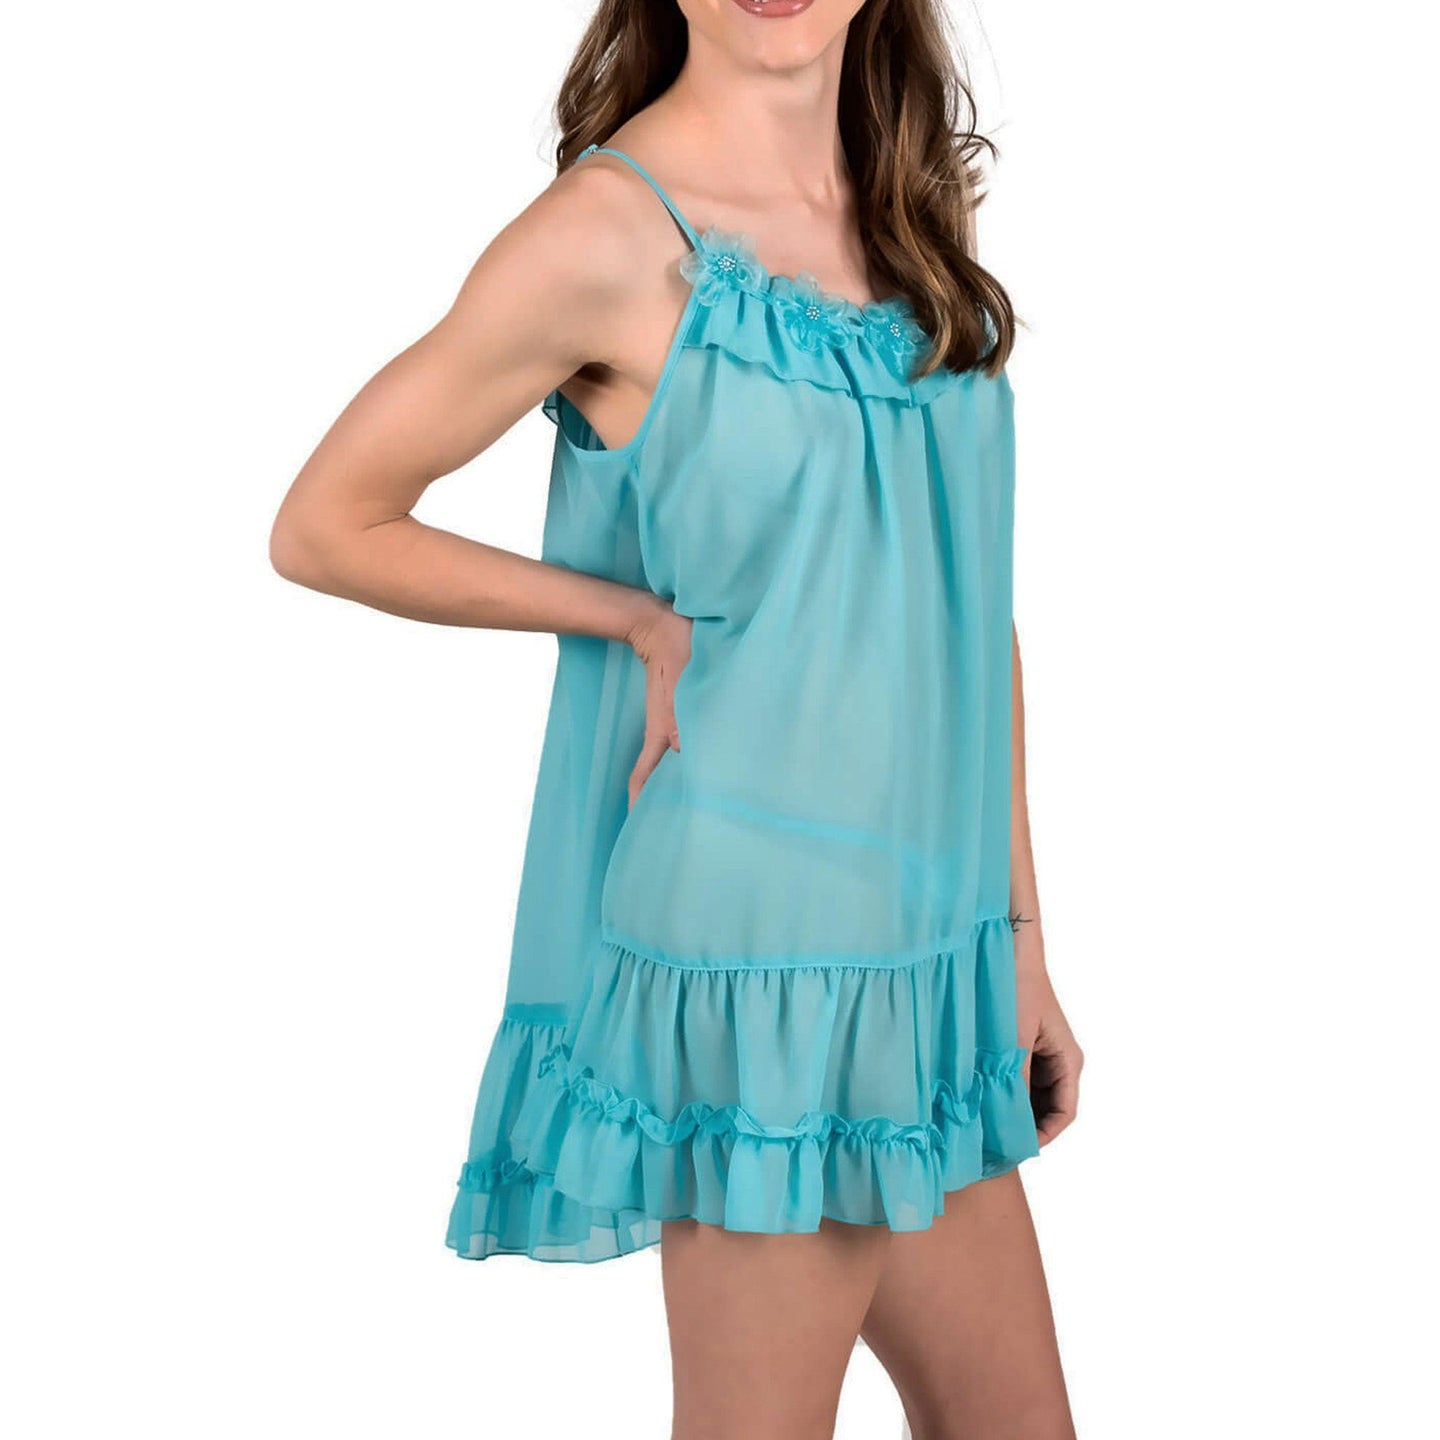 Sophie Sheer Babydoll - Blue Atoll Mystique Intimates